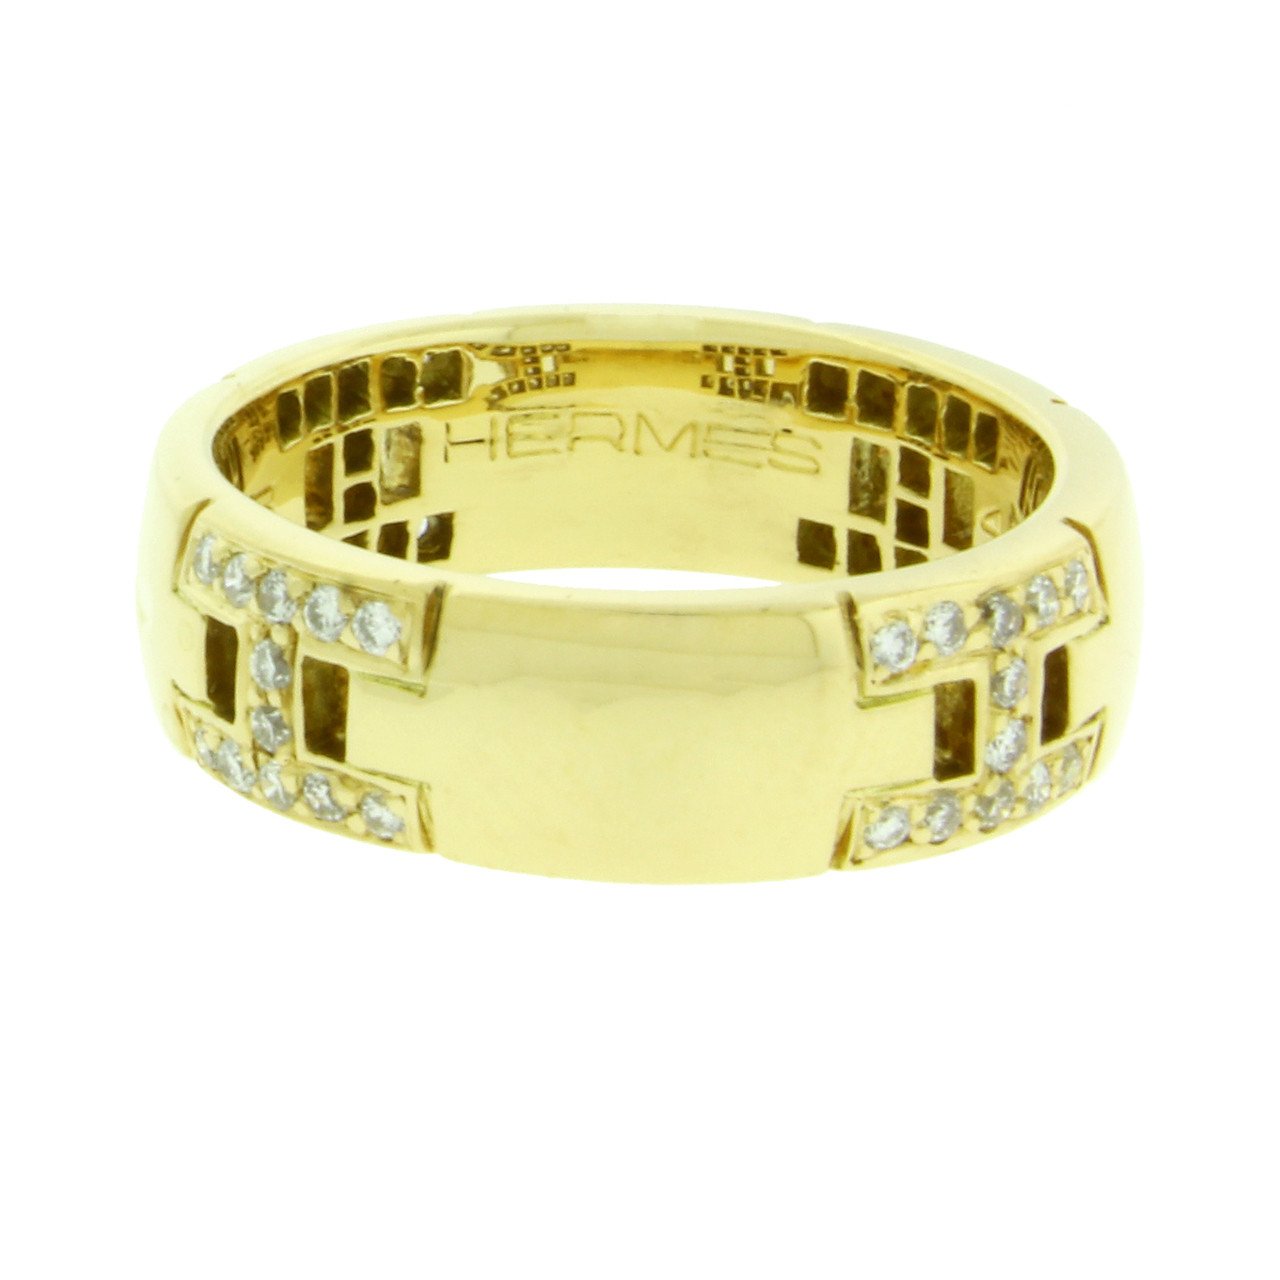 Hermès H diamond ring in 18k yellow gold in good condition size 4.5